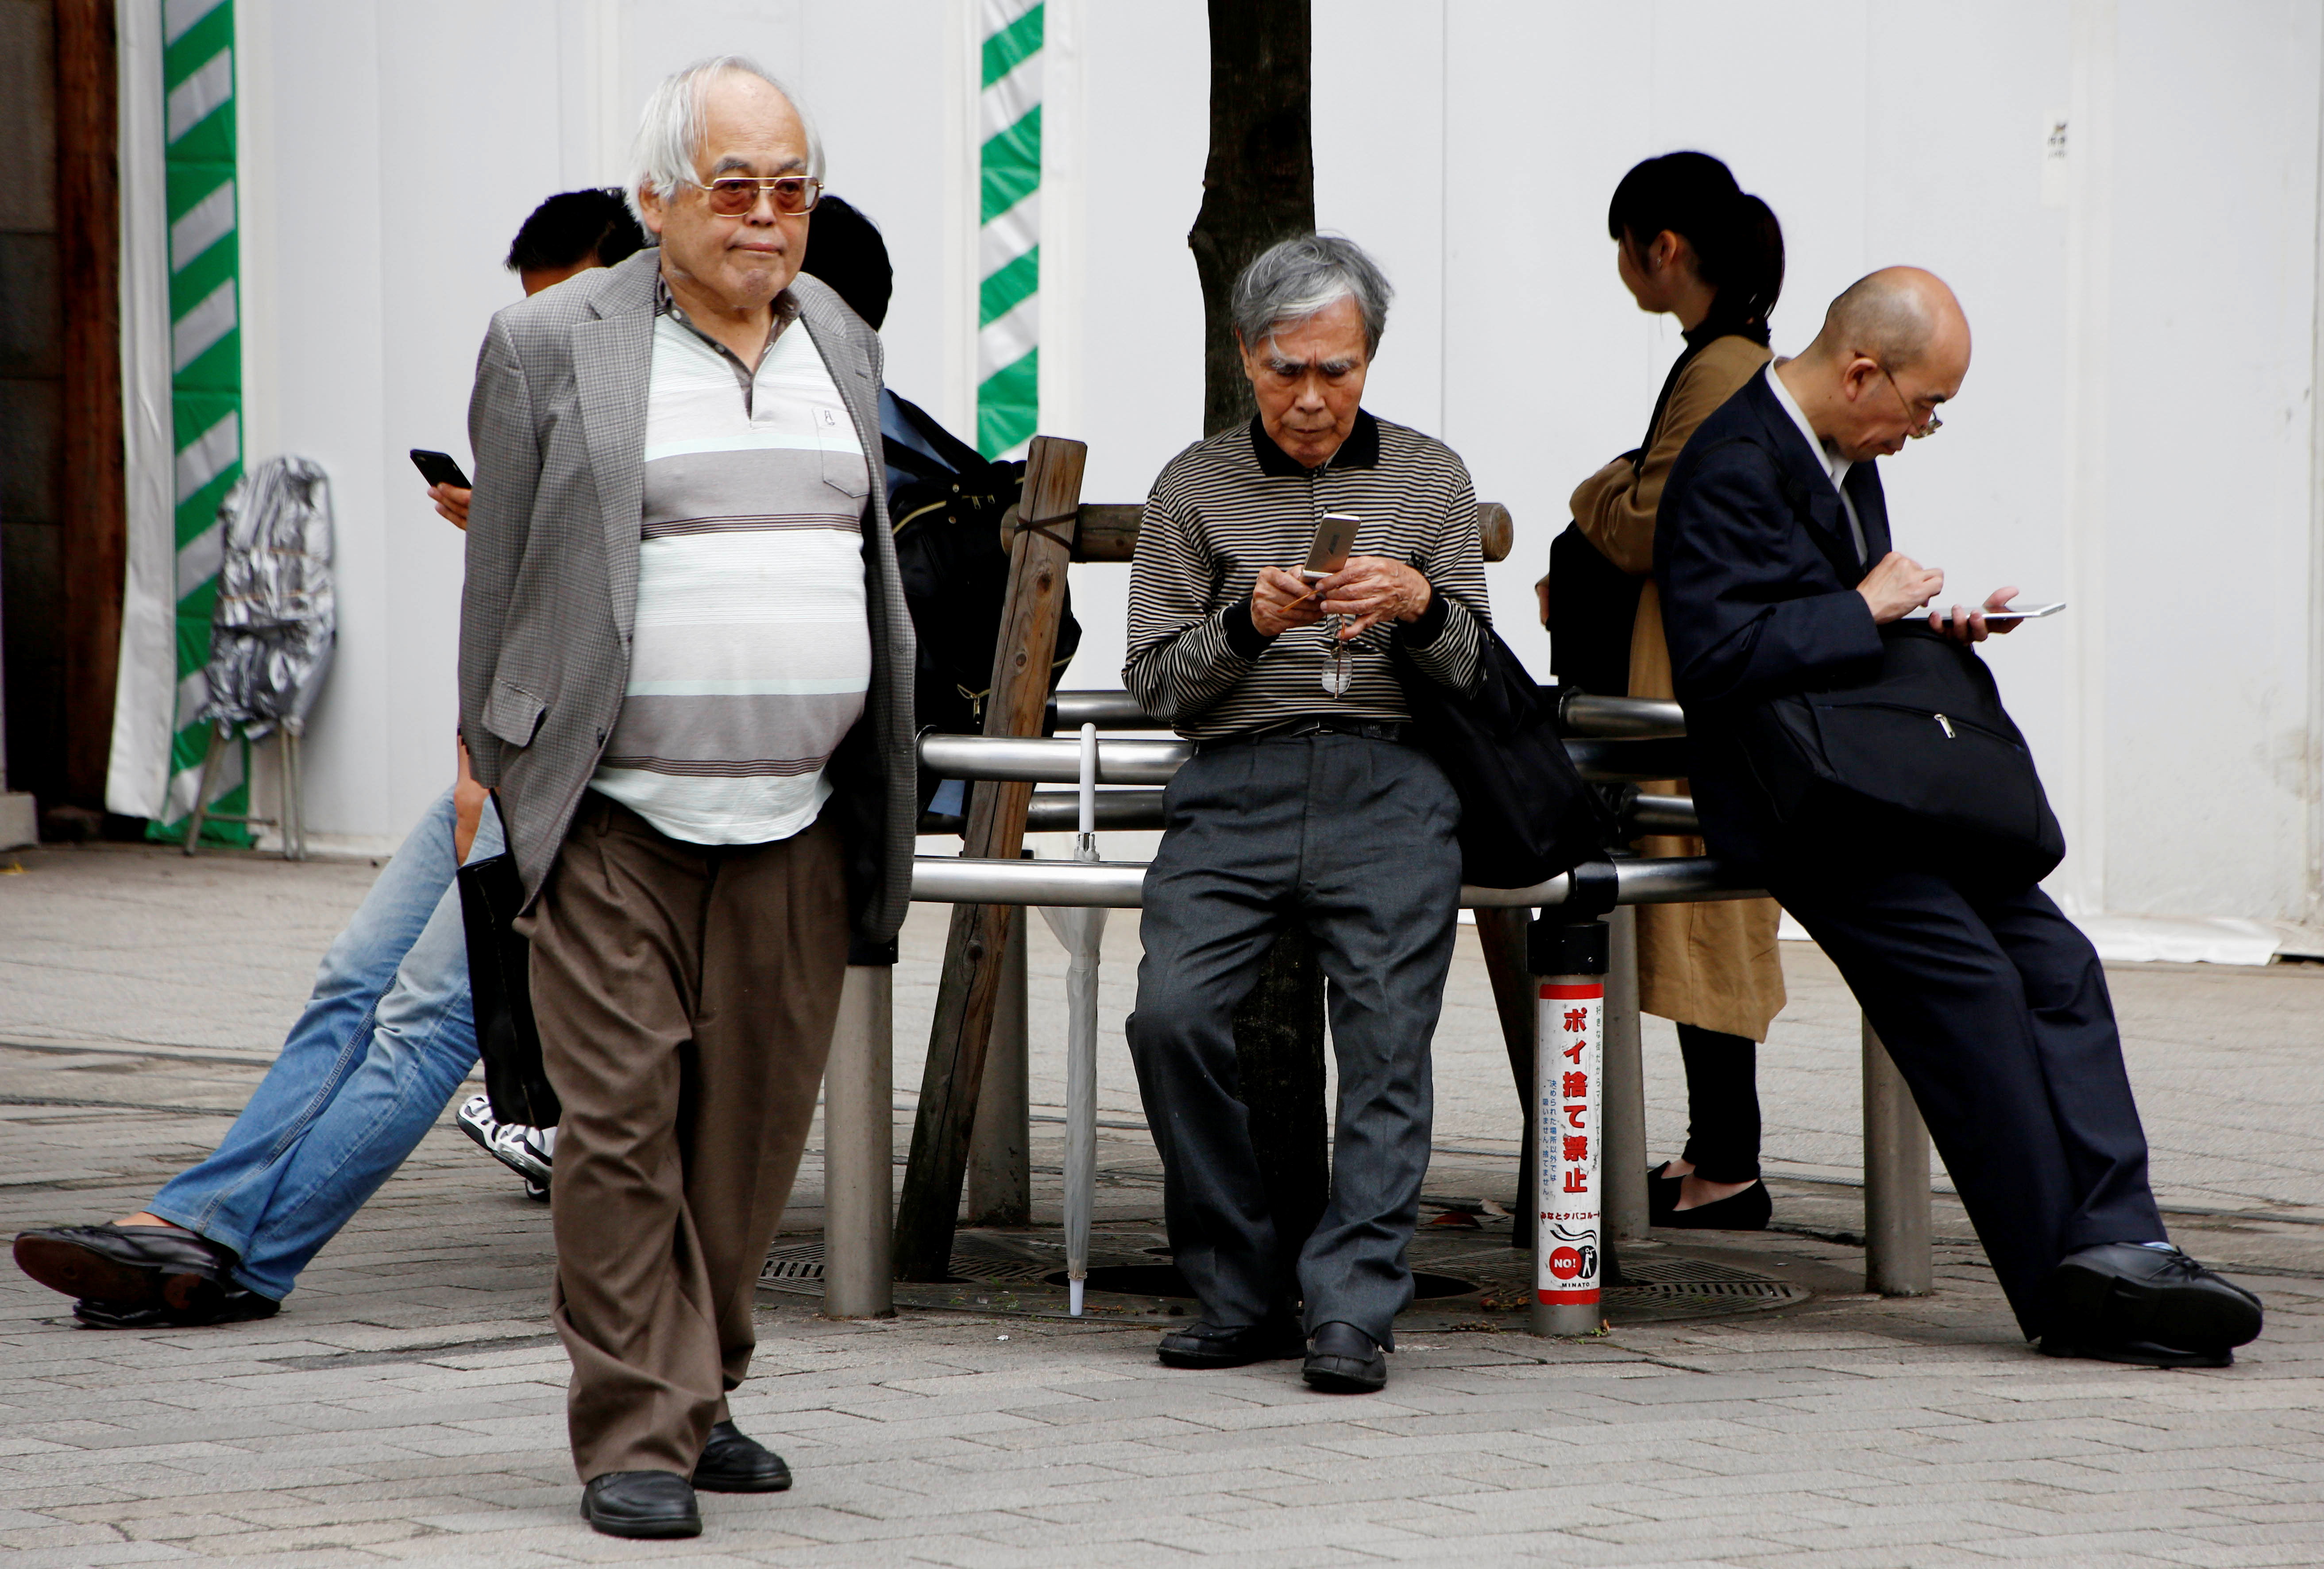 An elderly man uses a mobile phone in front a station in Tokyo